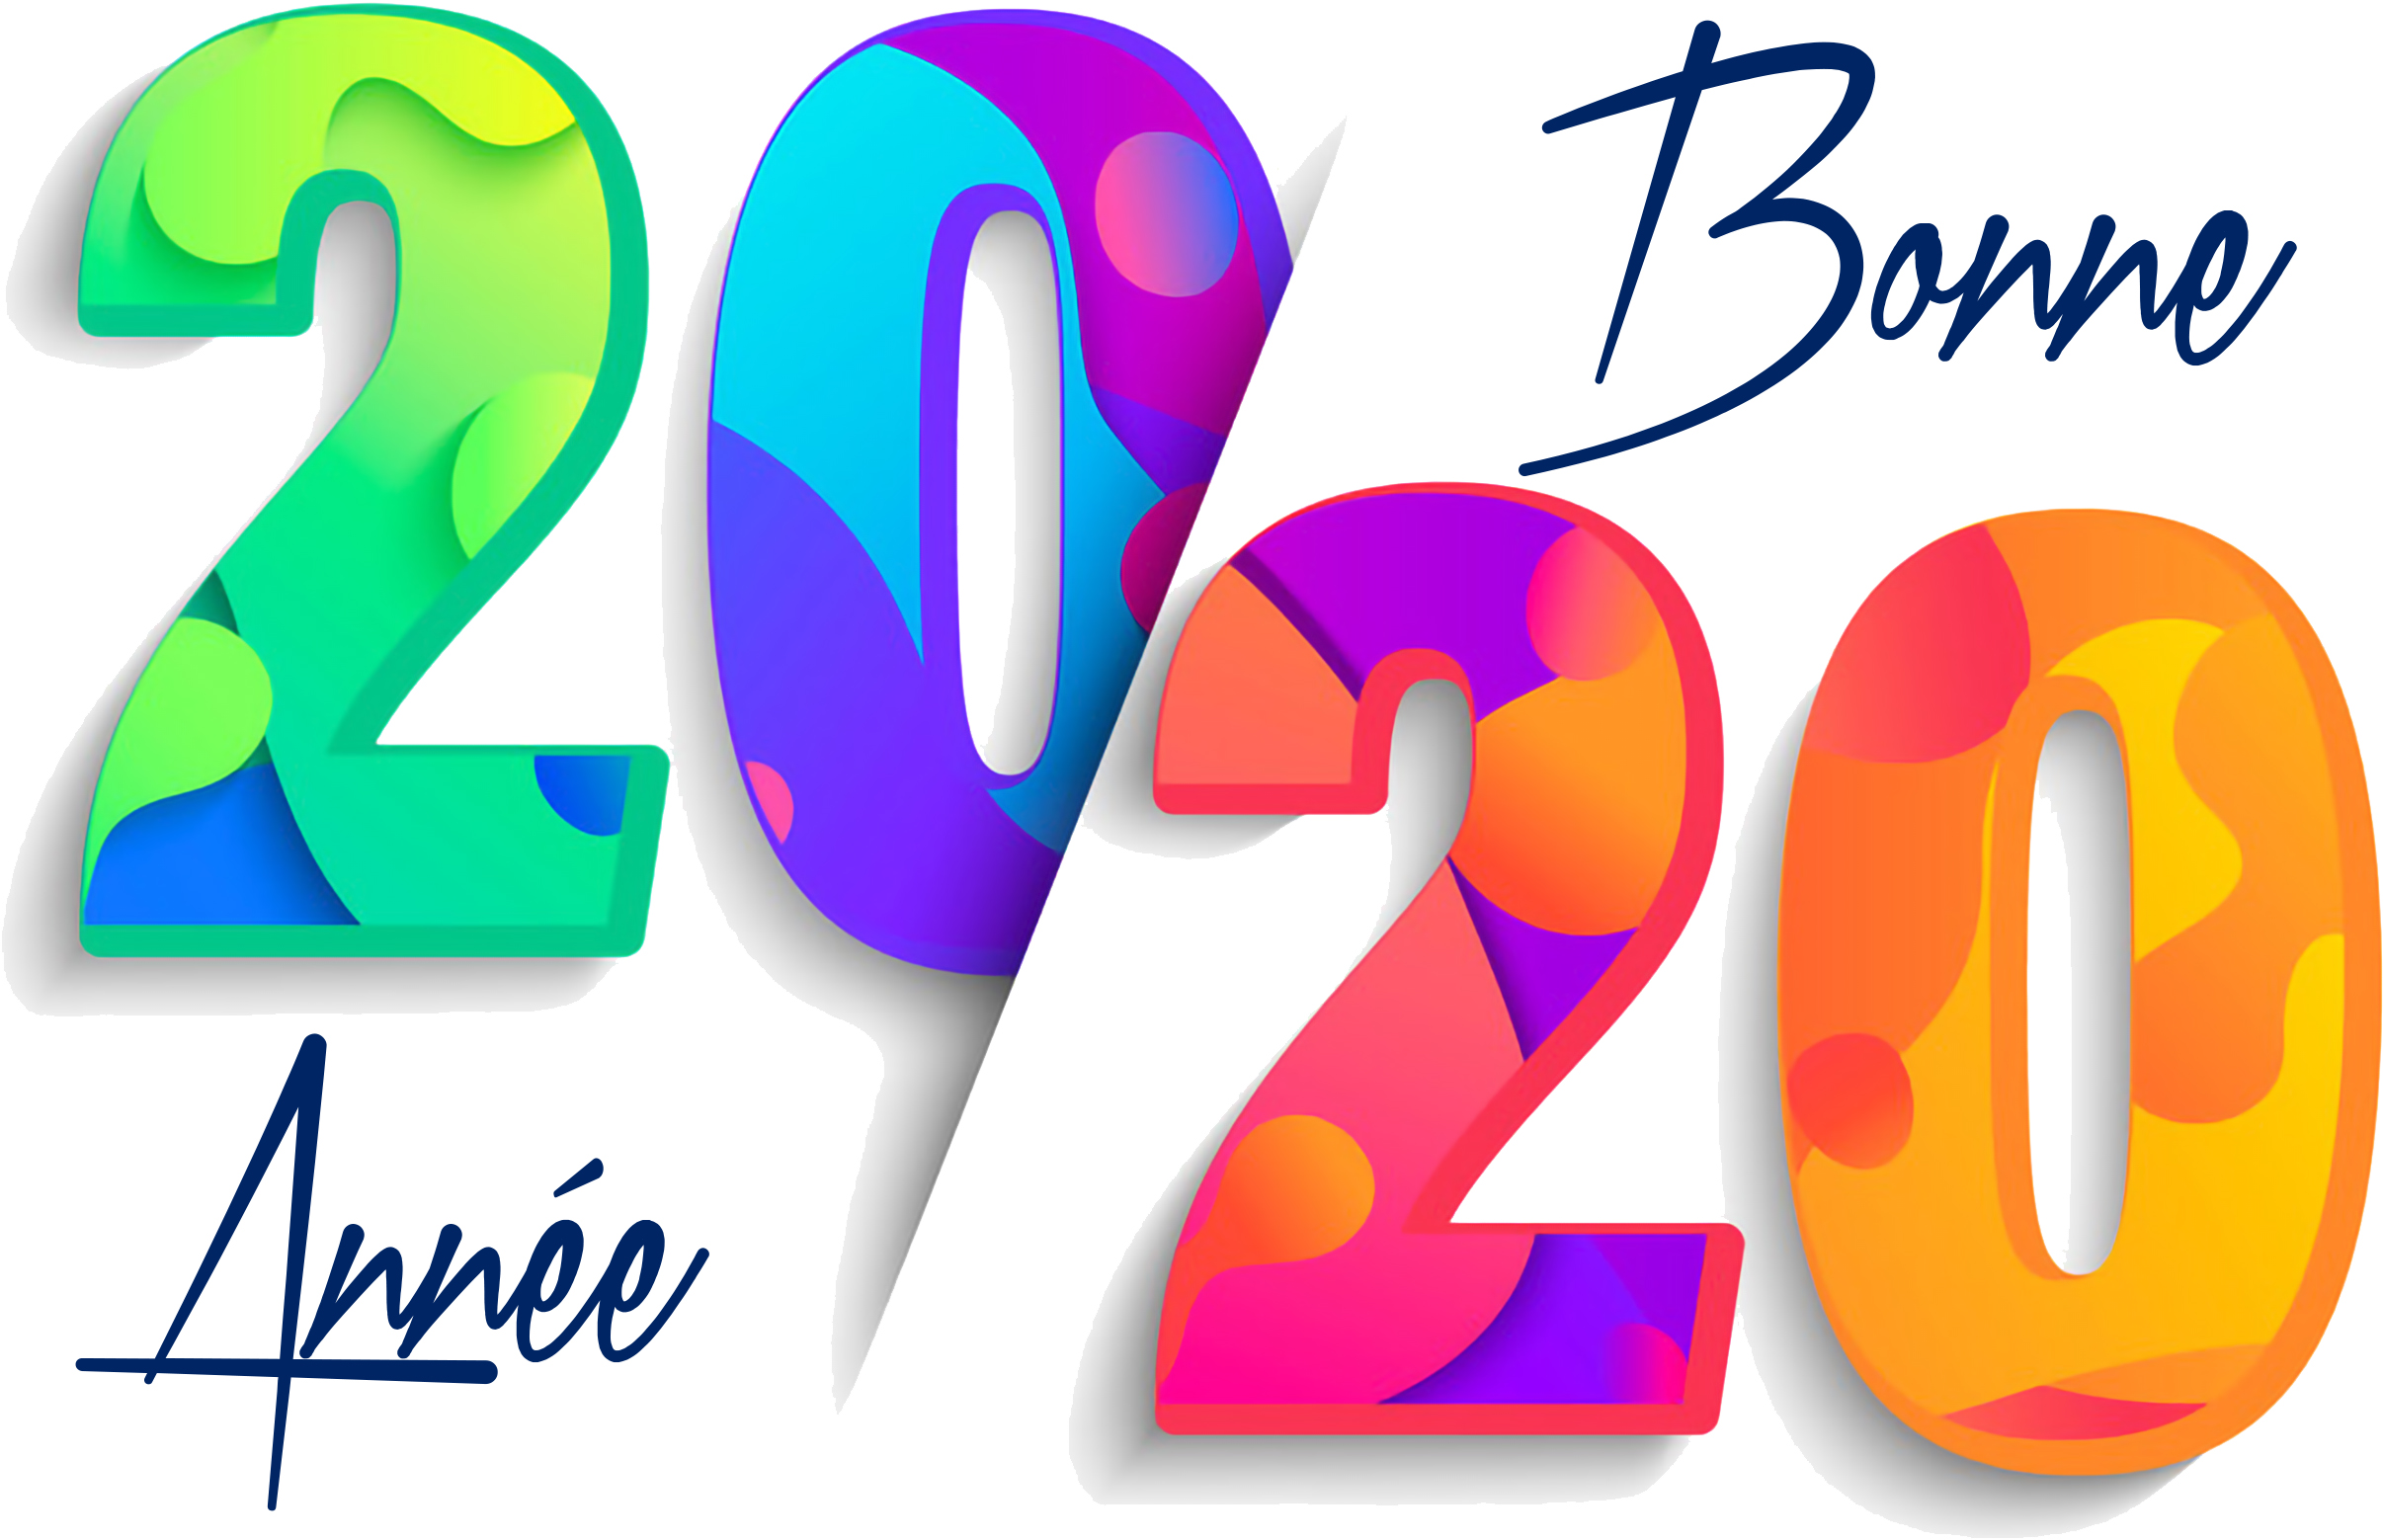 Meilleurs Voeux pour 2020 - Happy New year, best wishes for 2020